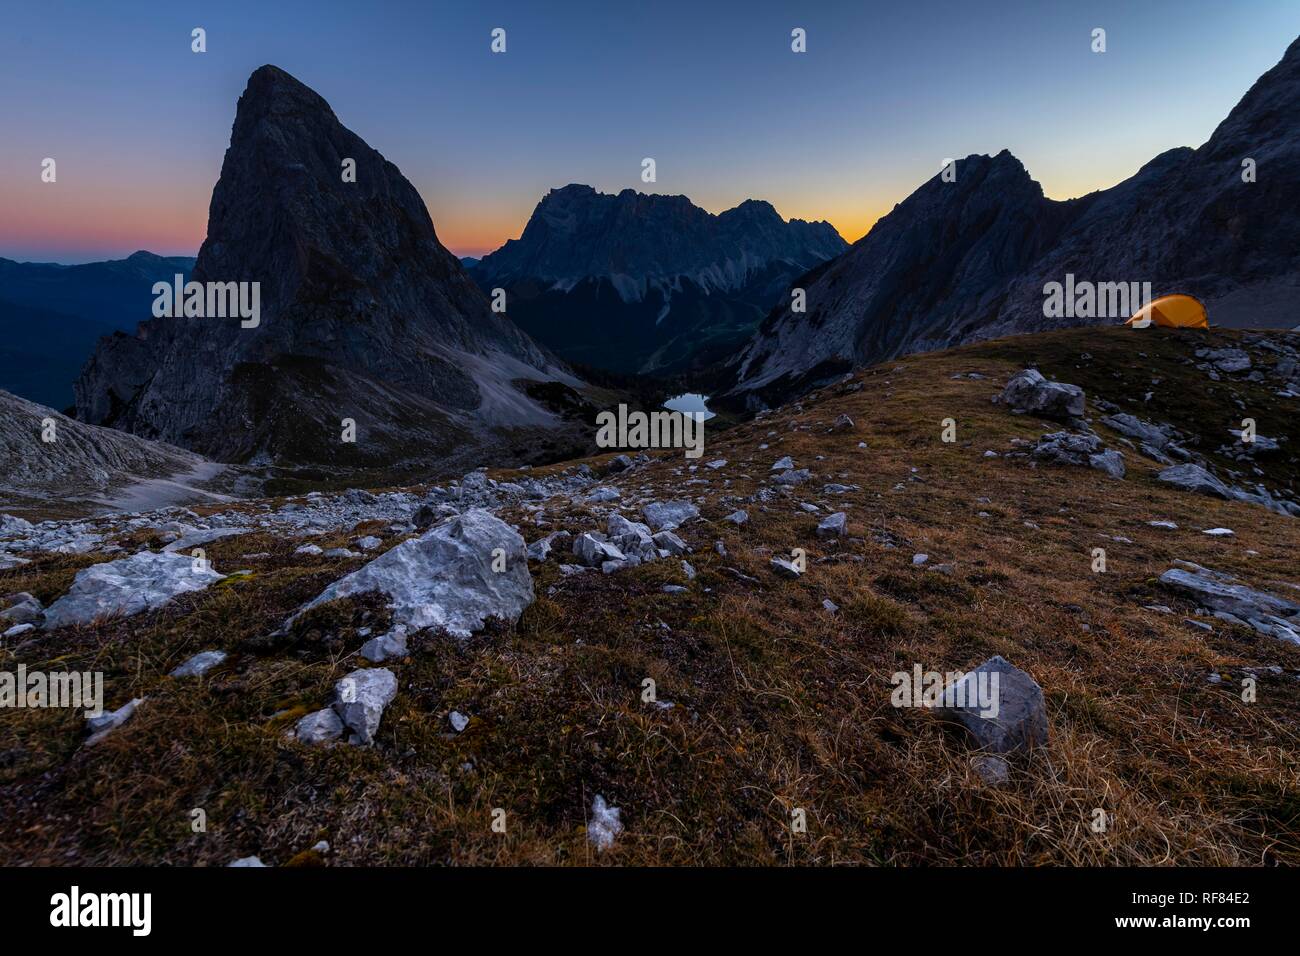 Peak of Sonnenspitze with tent and Zugspitze in the background at blue hour, Ehrwald, Außerfern, Tyrol, Austria Stock Photo